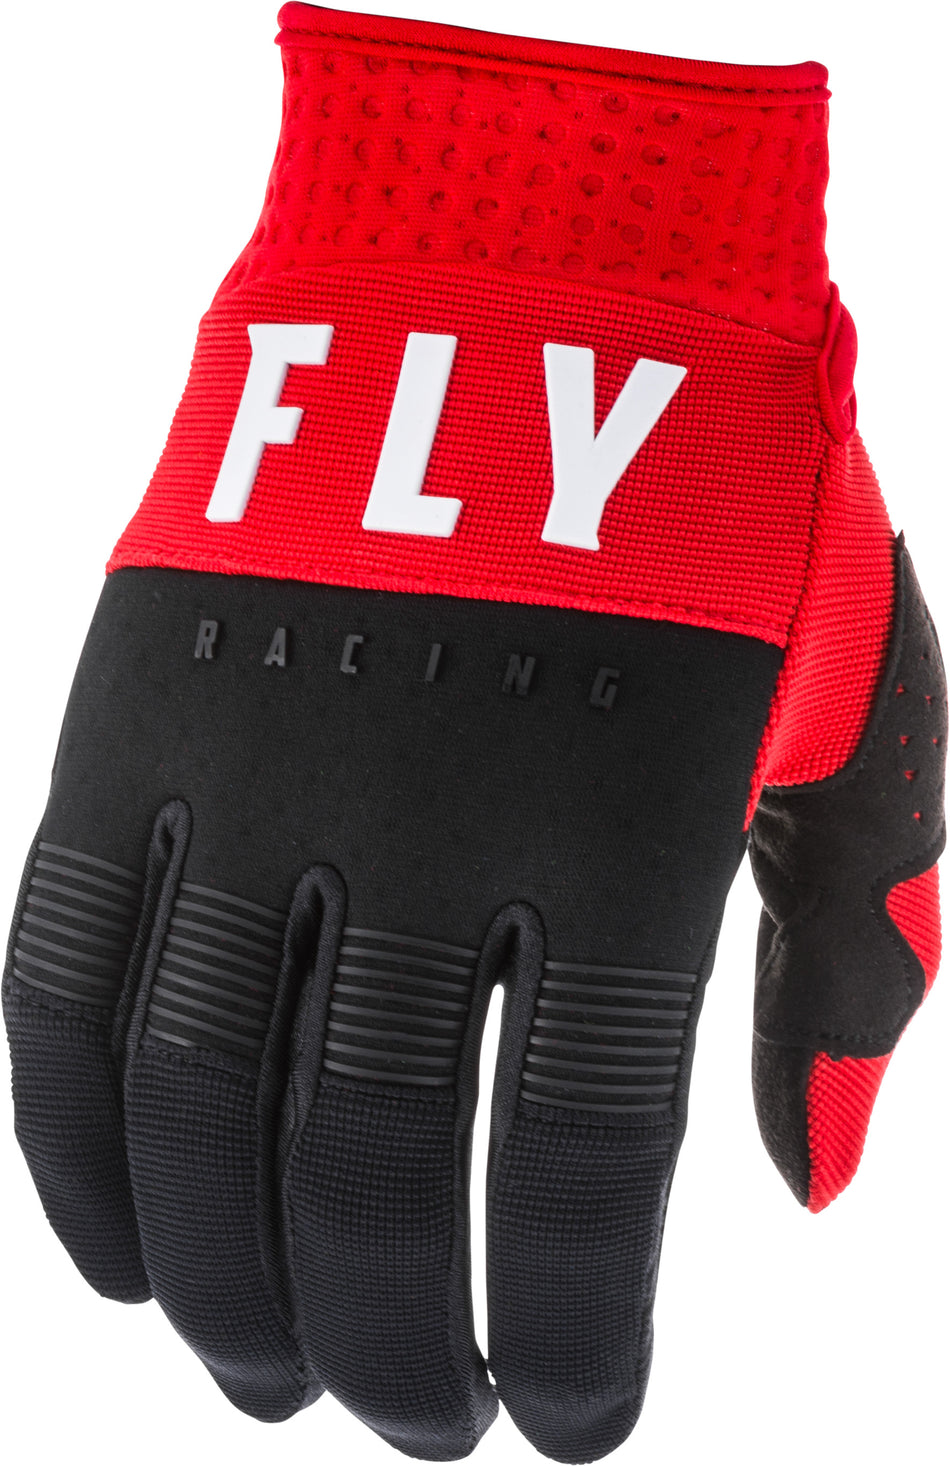 FLY RACING F-16 Gloves Red/Black/White Sz 10 373-91310